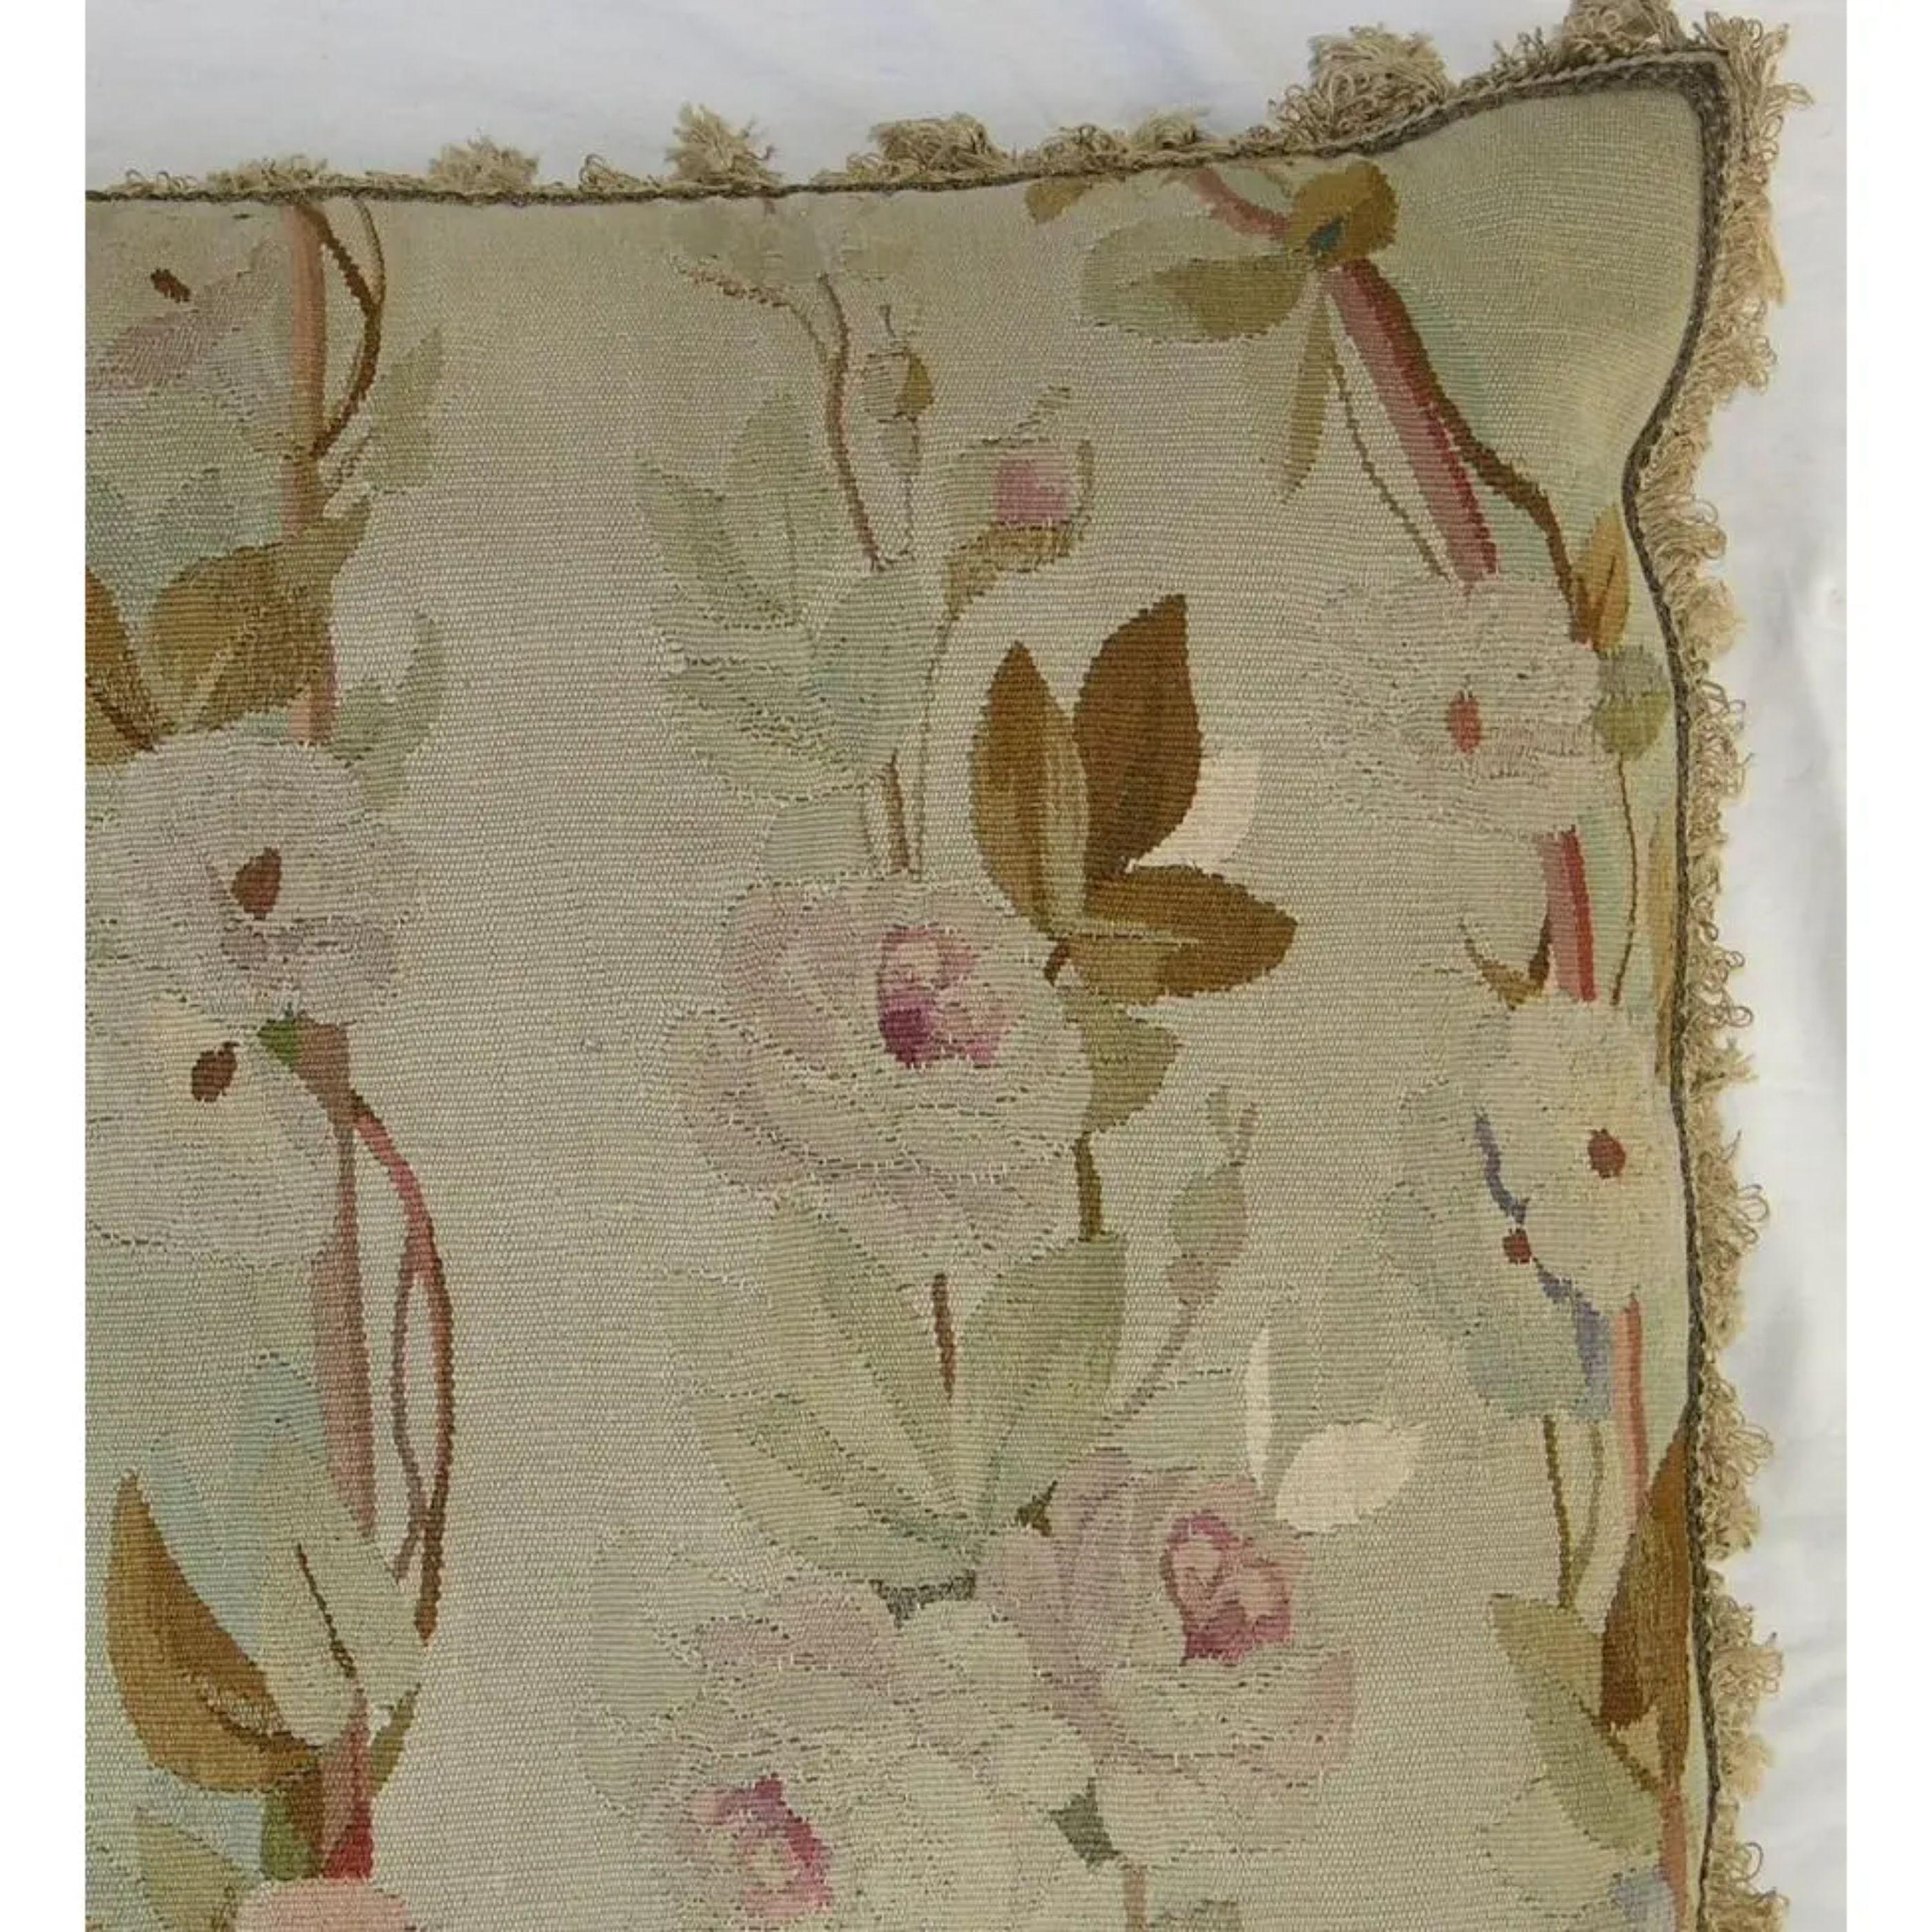 Antique 19th century French Aubusson tapestry pillow. 21'' x 21''